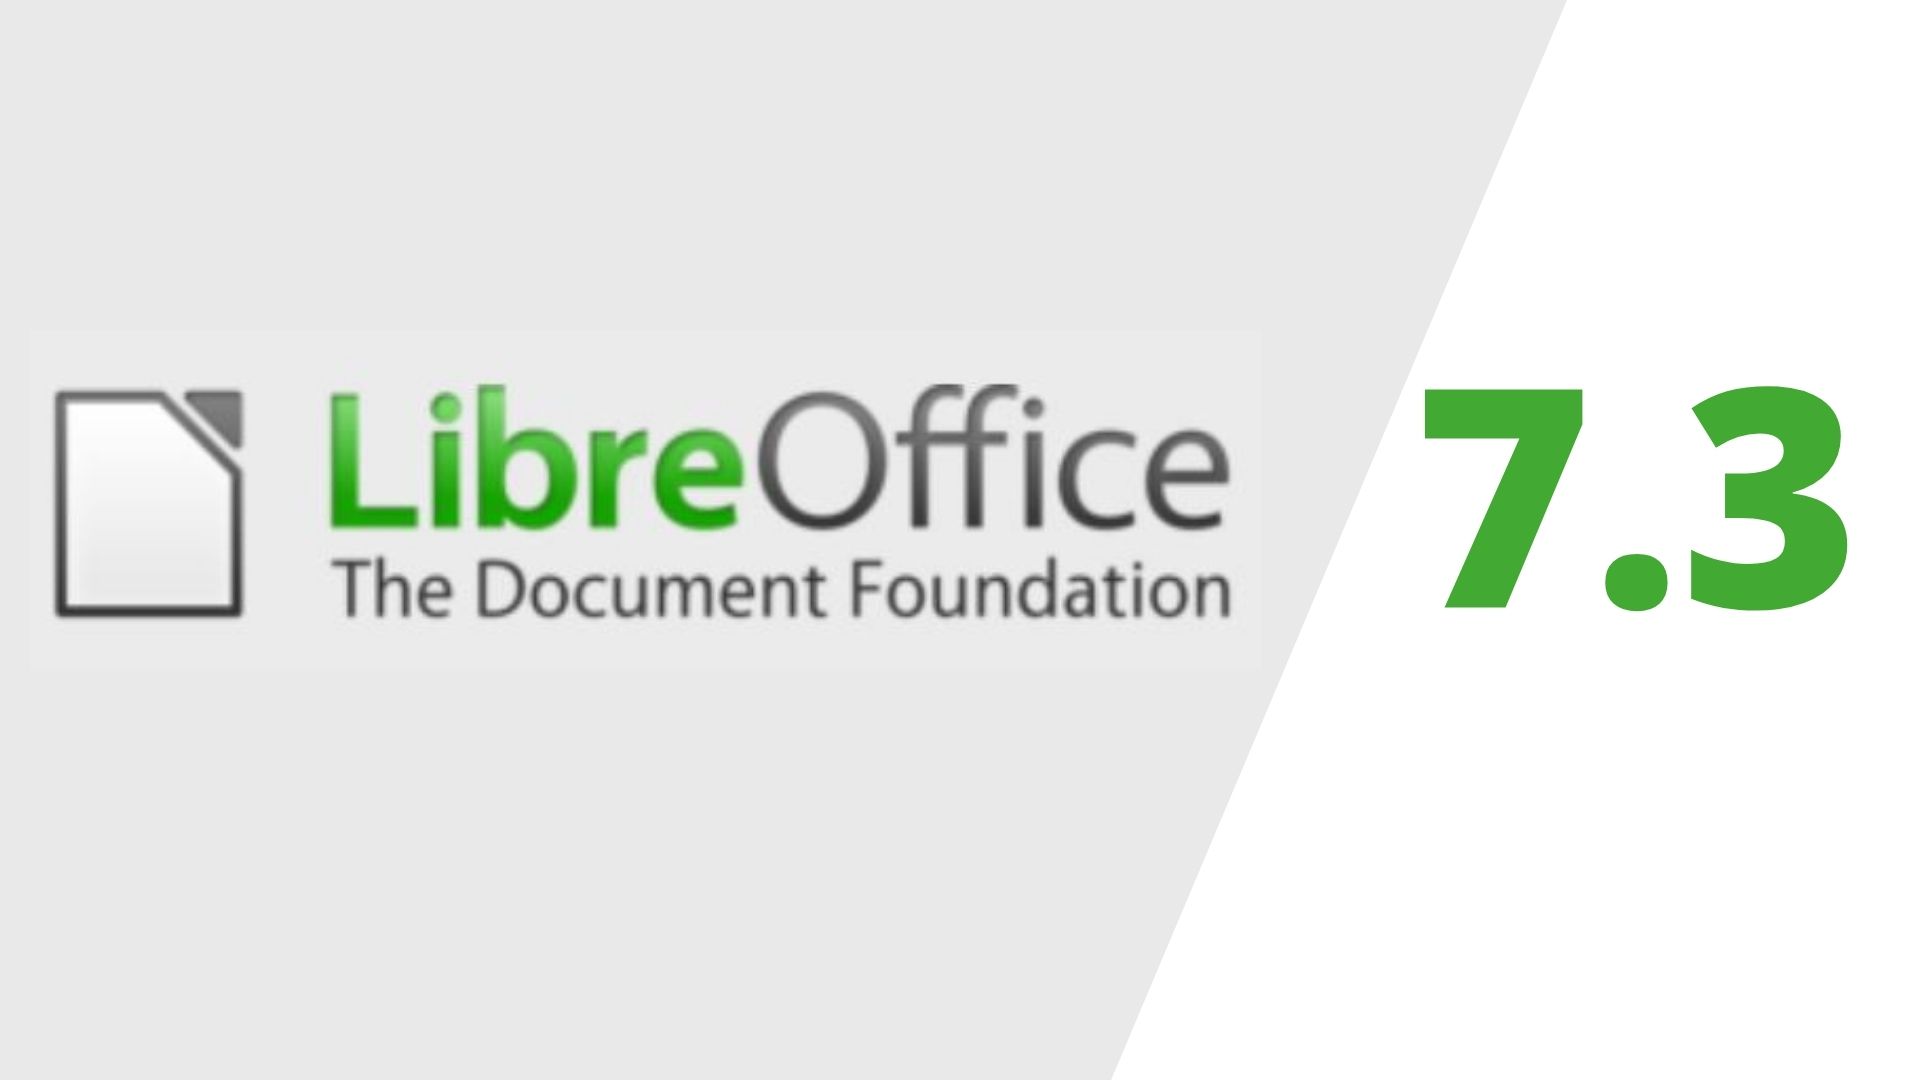 LibreOffice 7.3 features and changes